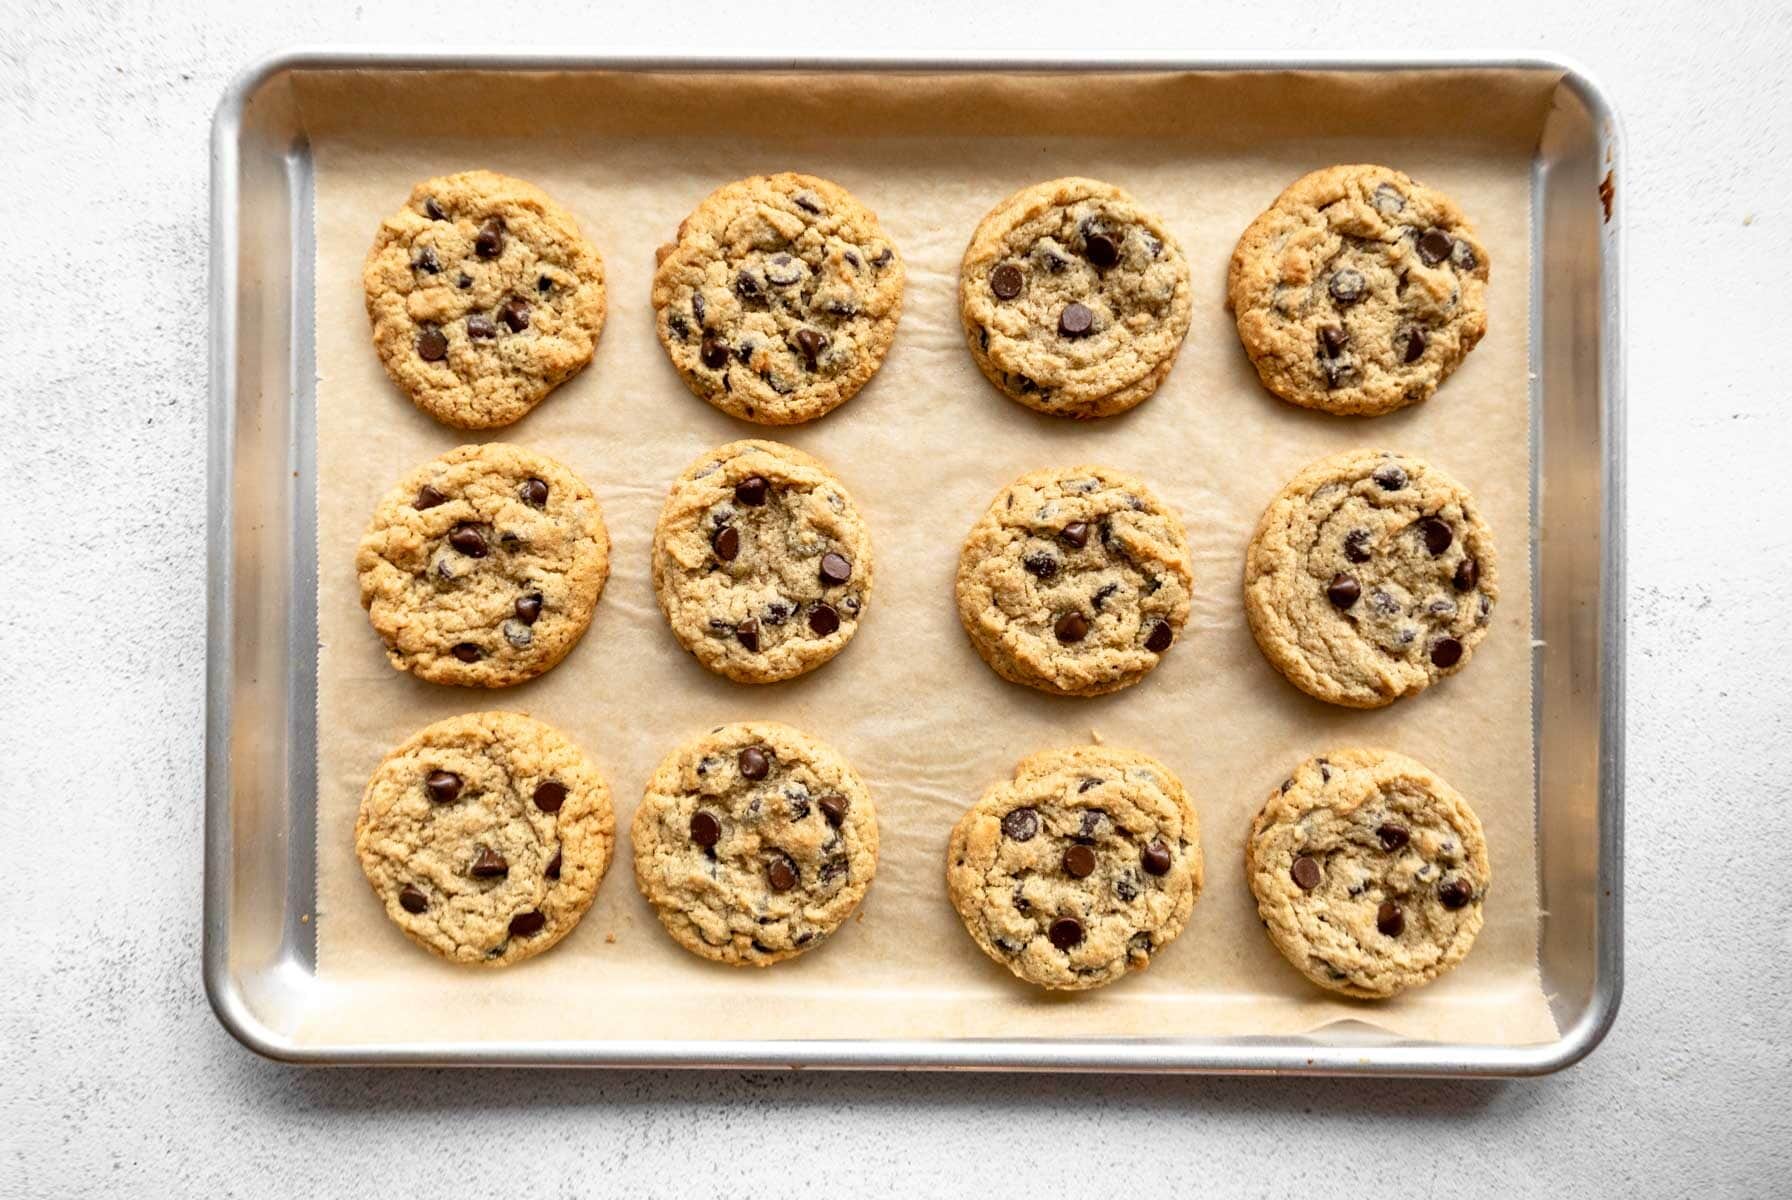 baked almond flour chocolate chip cookies in a baking sheet.